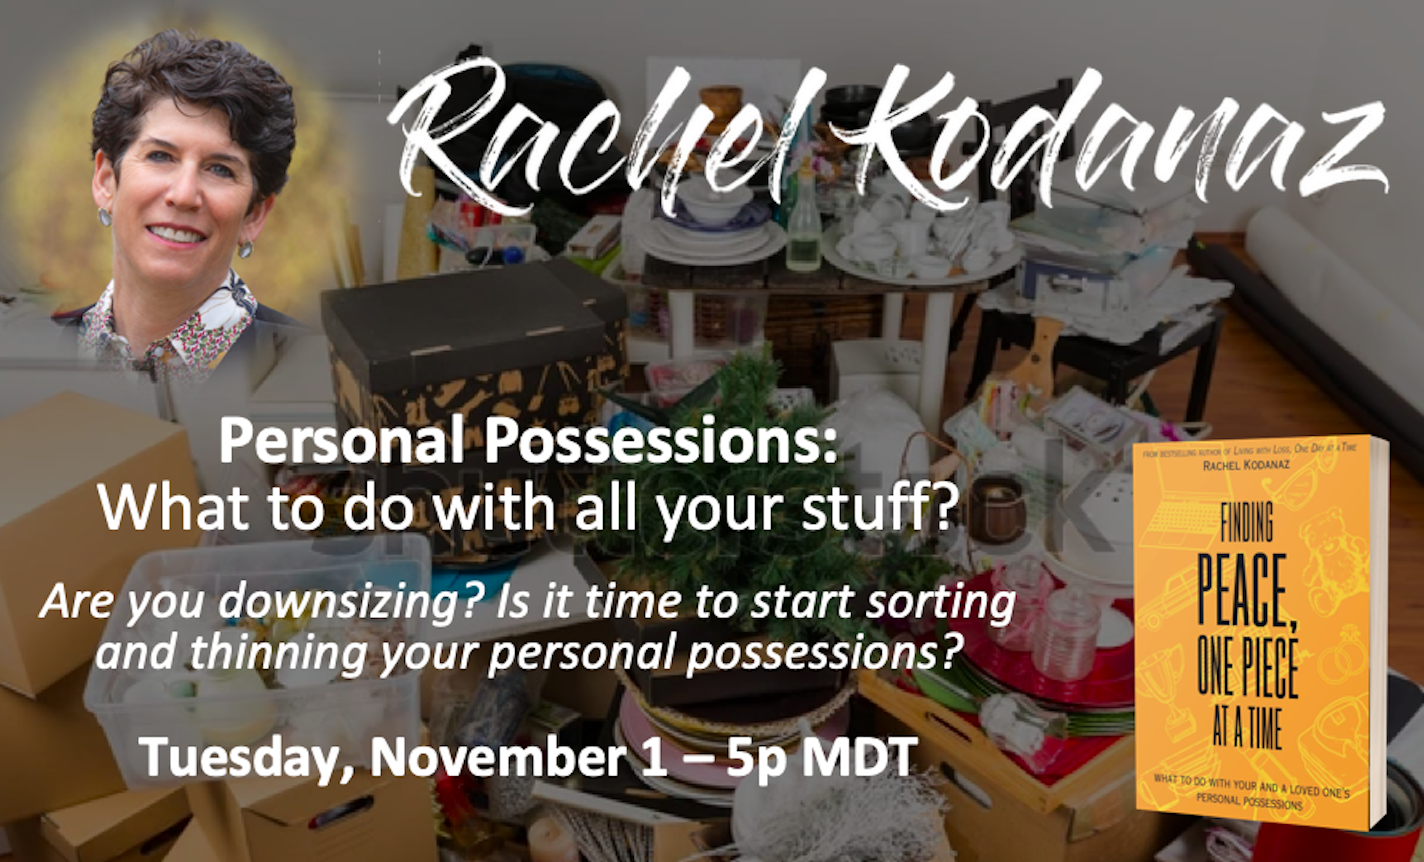 Personal Possessions: what to do with all your stuff?